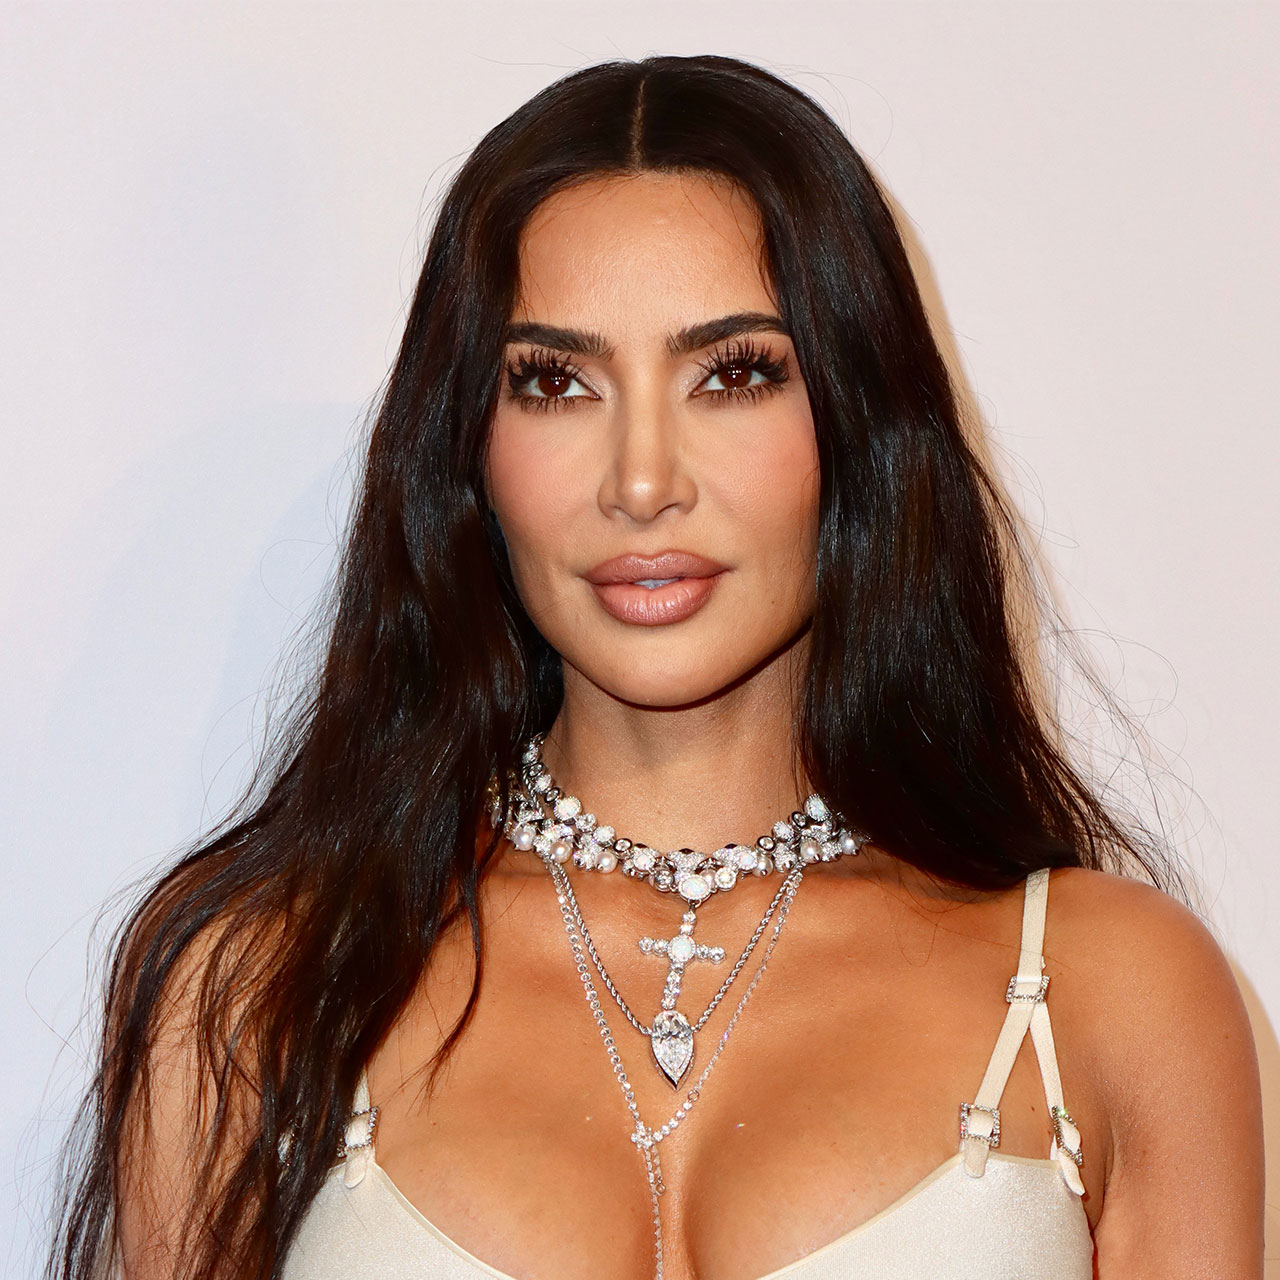 Kim Kardashian Shows Off Her Sculpted Body While Modeling The New  Valentine's SKIMS Collection - SHEfinds